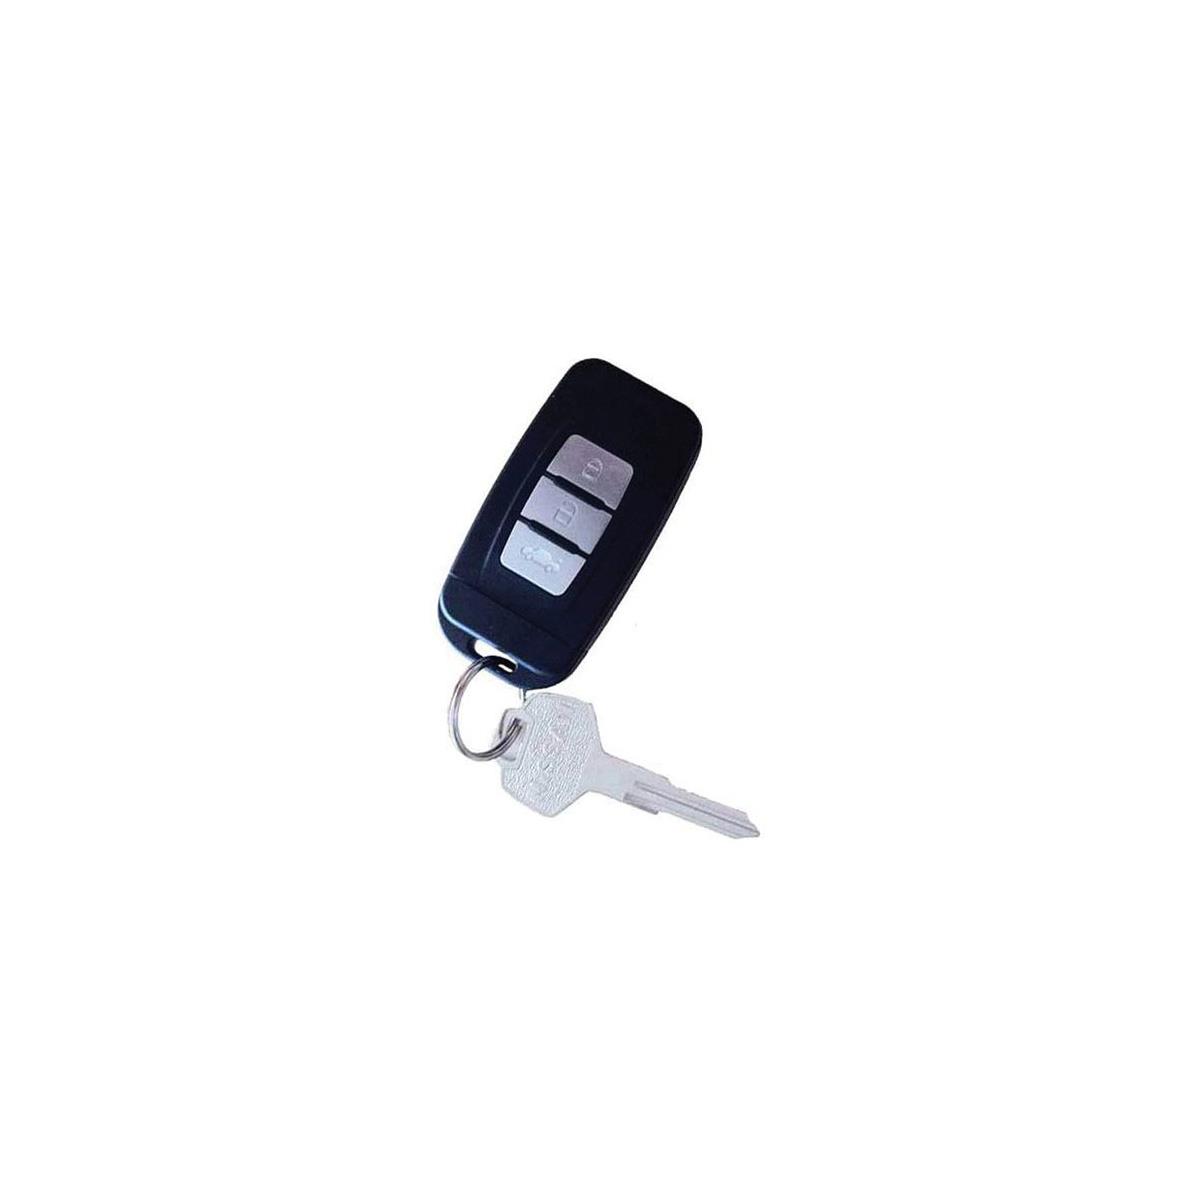 Image of KJB Security Products Lawmate DVR203HD Car Key Fob with 5MP Hidden Camera &amp; DVR